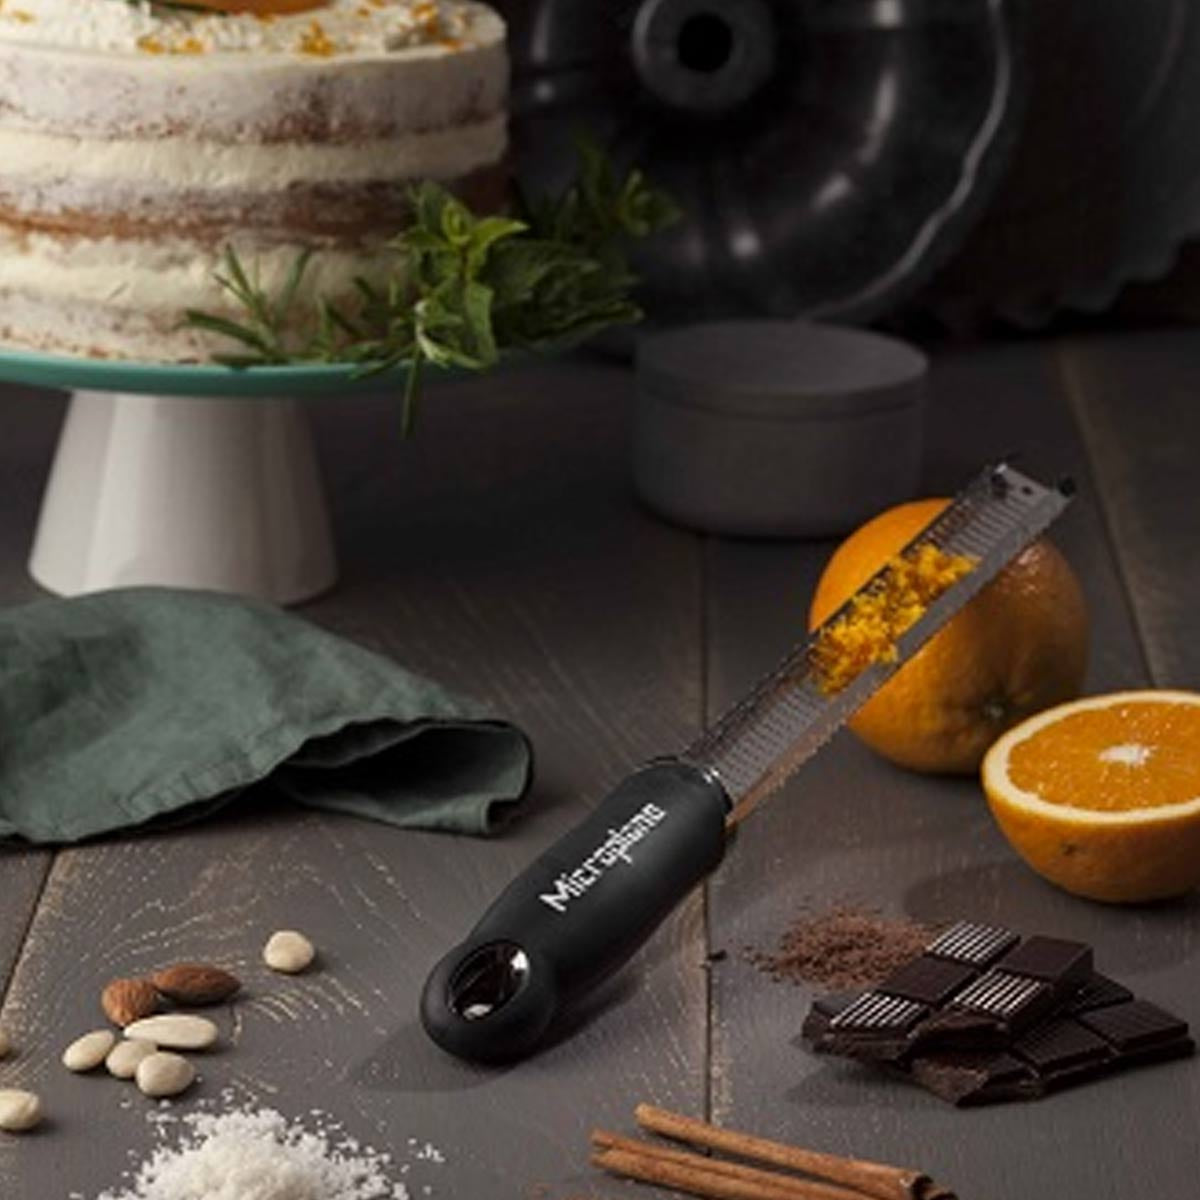 Microplane Premium Classic Series Zester & Grater For Hard Cheese and Citrus Zesting